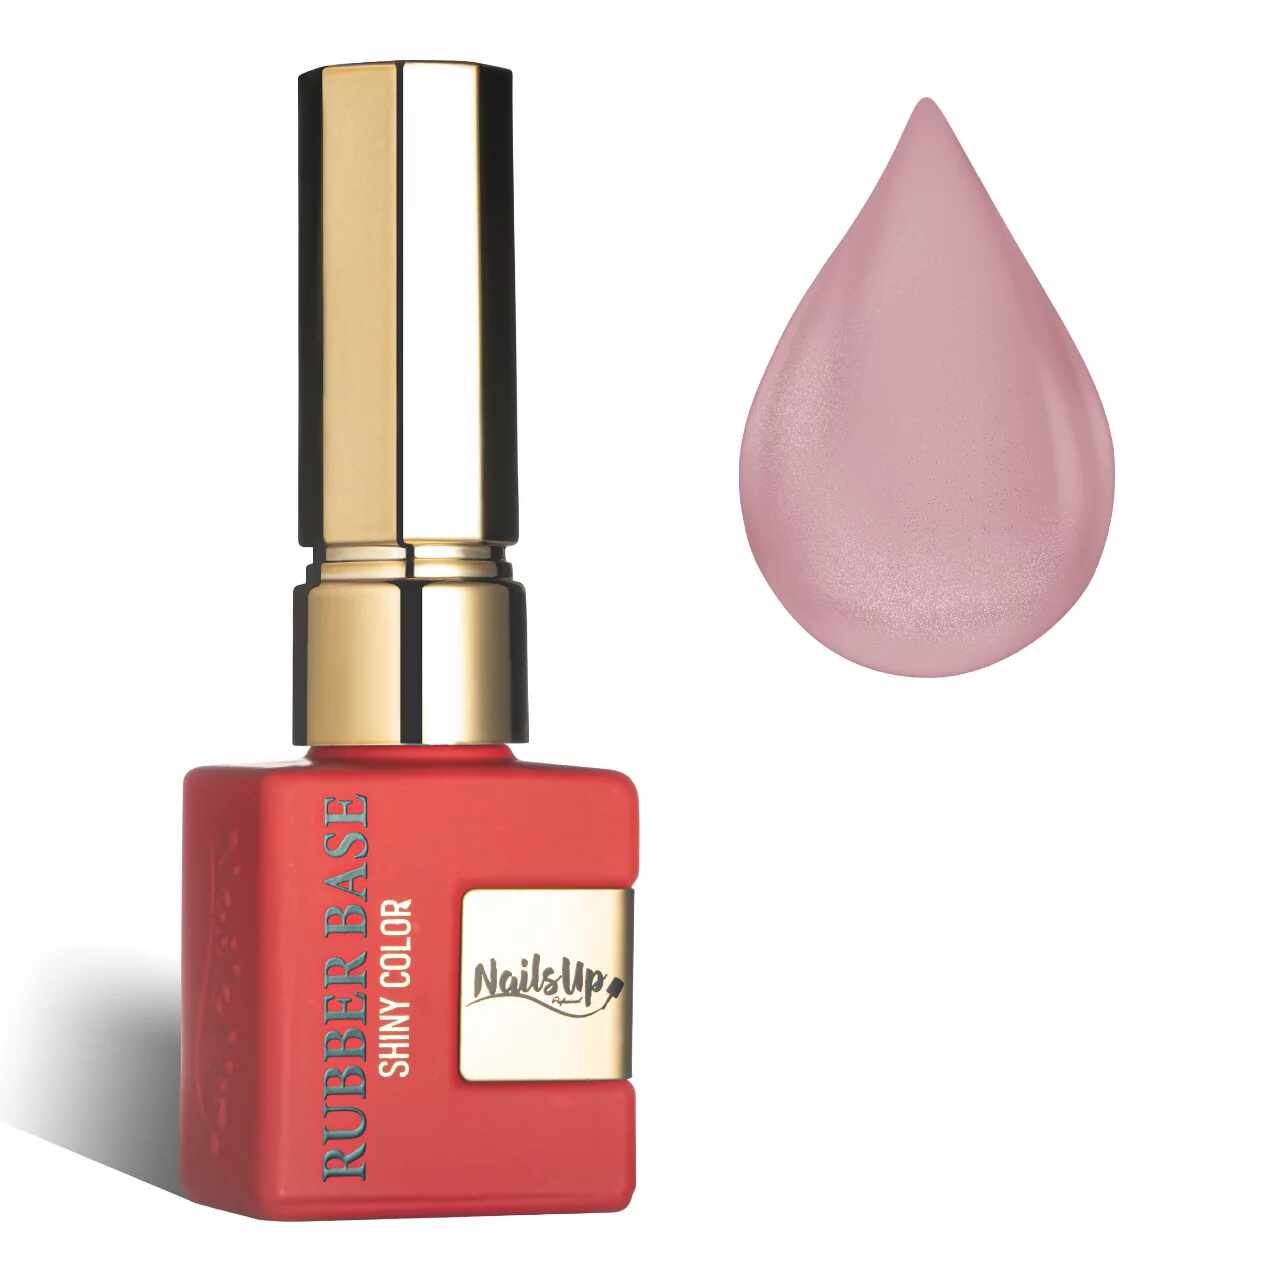 Shiny Rubber Base Nailsup - Gold Is Your Reflection Maldive 81, 8ml